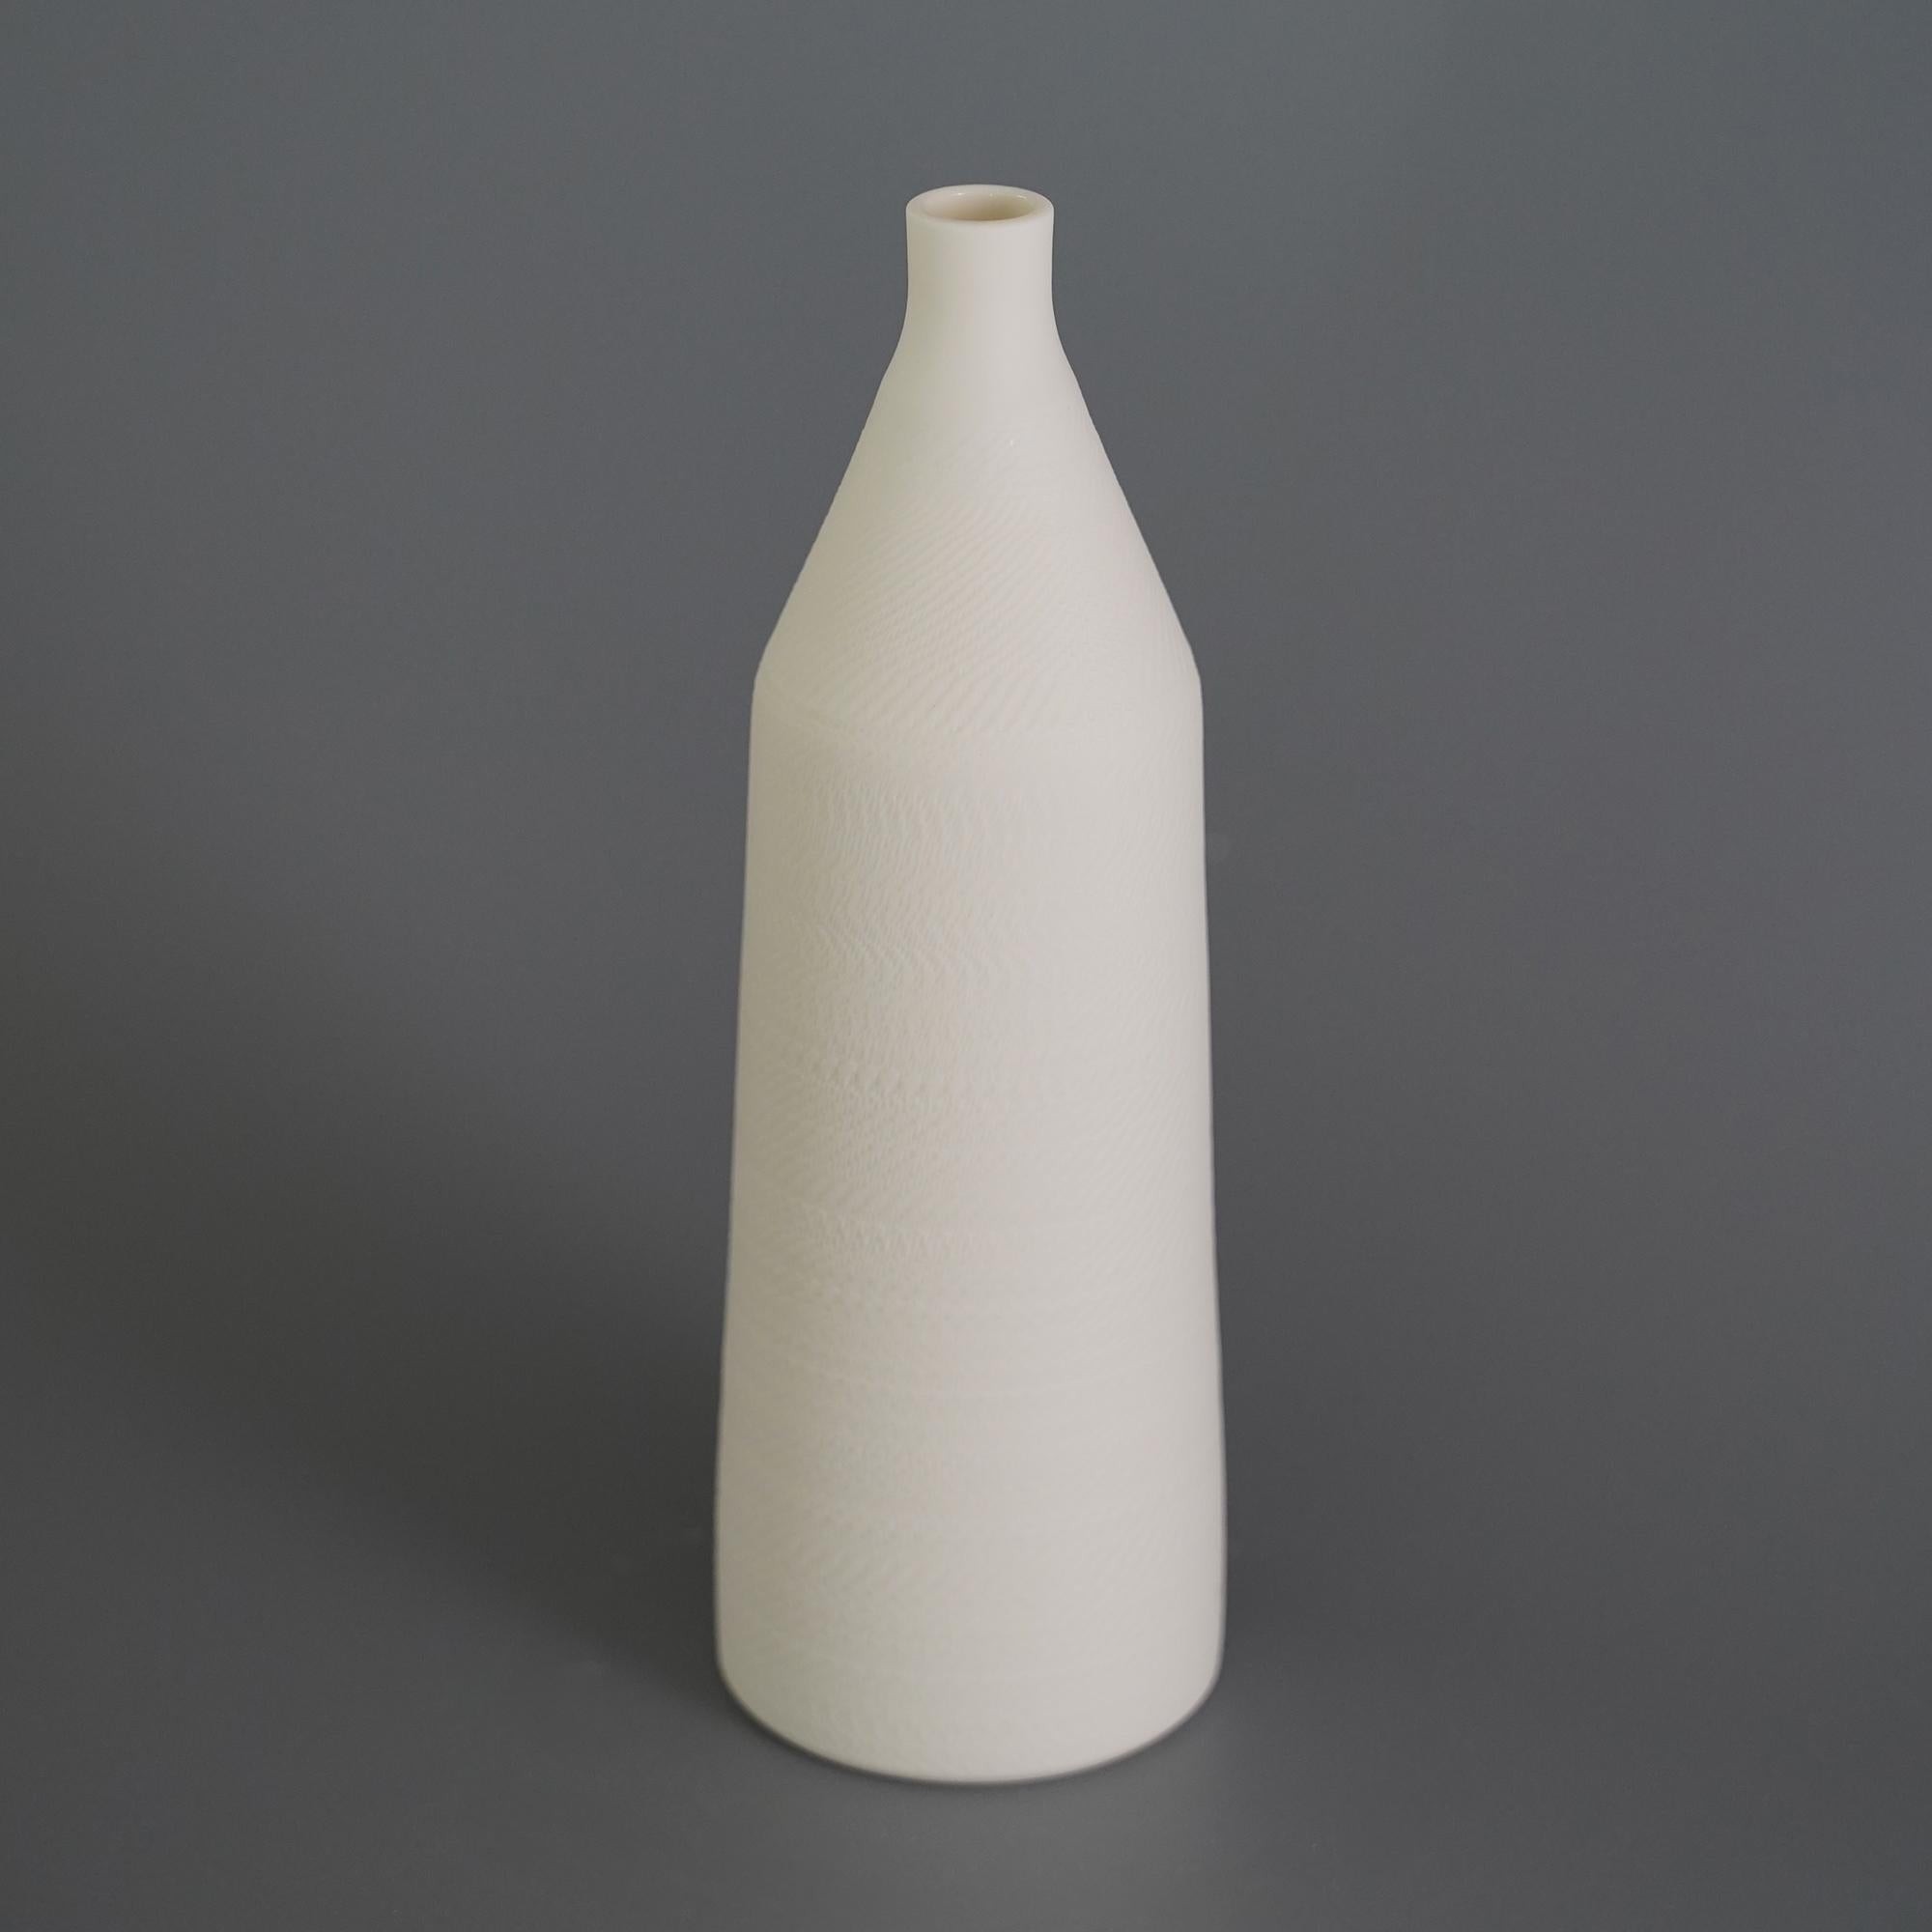 Set of 2 Helice vase by Studio Cúze
Dimensions: W 7 x H 21.5 cm
Materials: ceramic

This handmade vase has a finely structured surface and is finished with a white paint. With the magnifying glass function you can see the fine patterns that